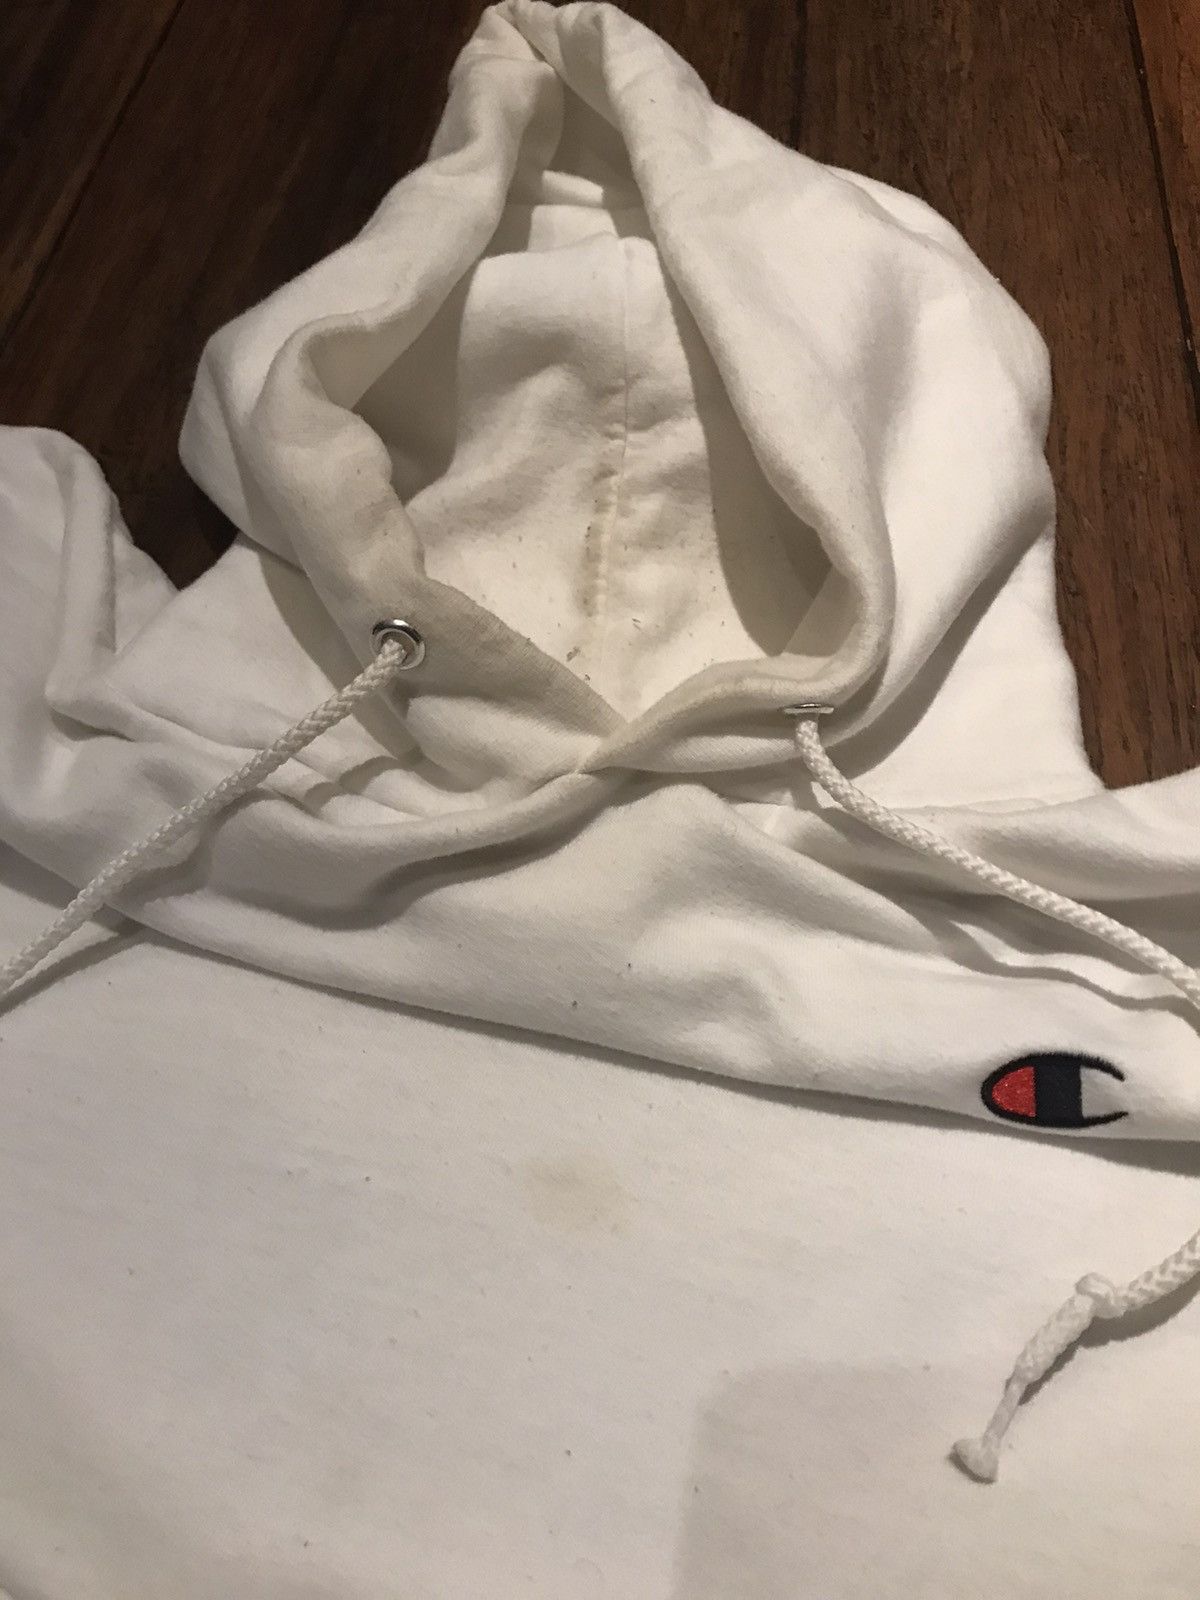 Champion White Champion Hoodie ‘Blue Scripted’ Size US M / EU 48-50 / 2 - 3 Preview